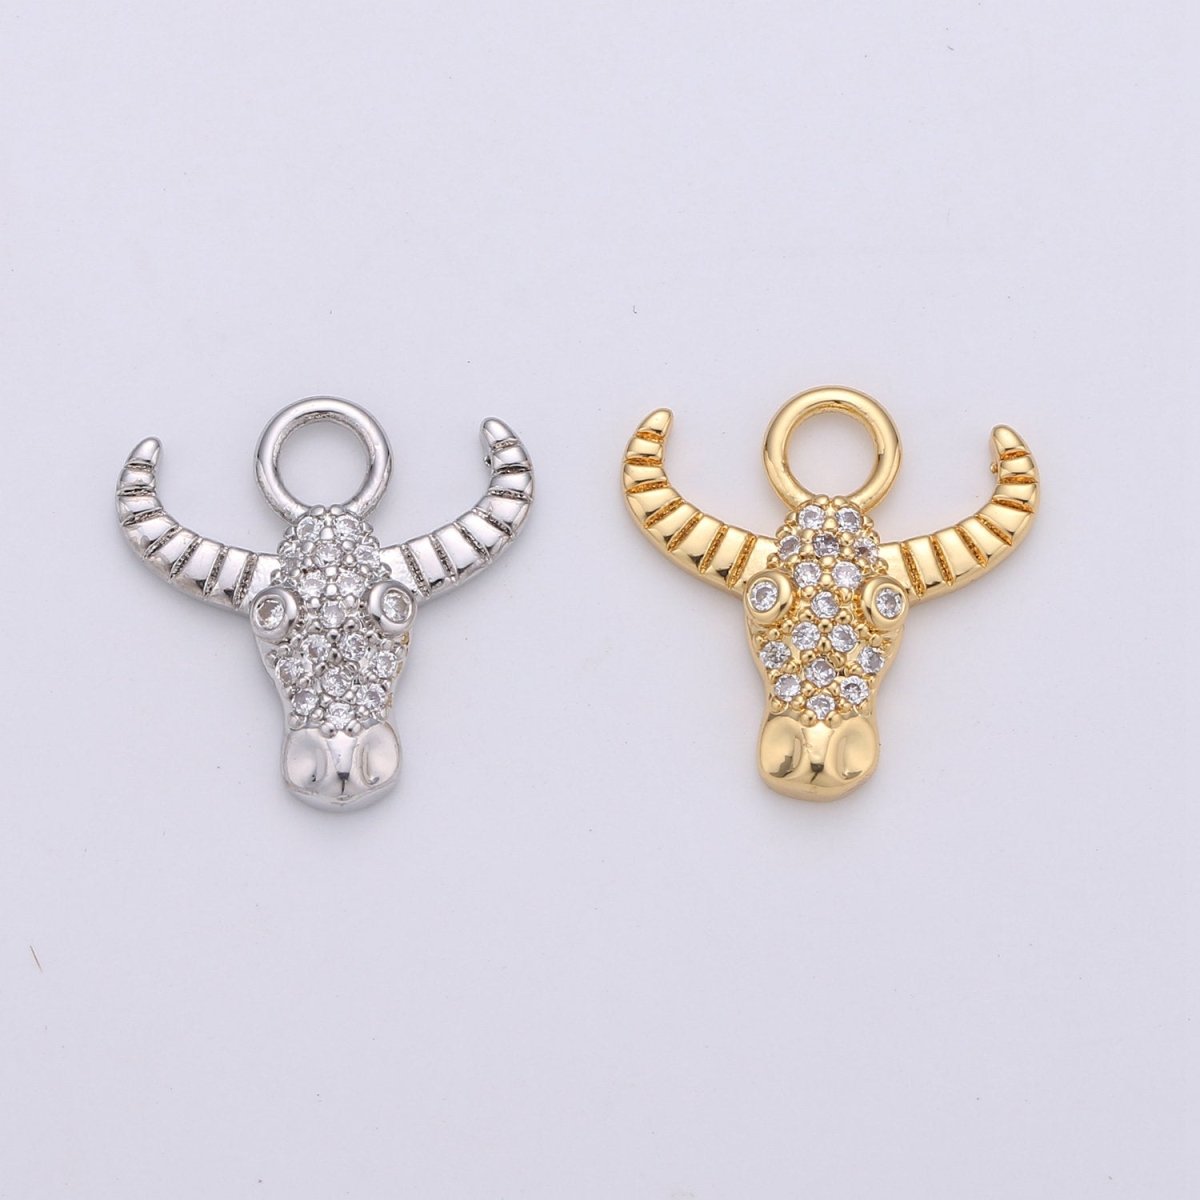 24K Gold Filled Dainty Bull Head Charm with Micro Pave Cubic Zirconia CZ Stone for Cow Animal Necklace or Bracelet Component C-935,C-936 - DLUXCA